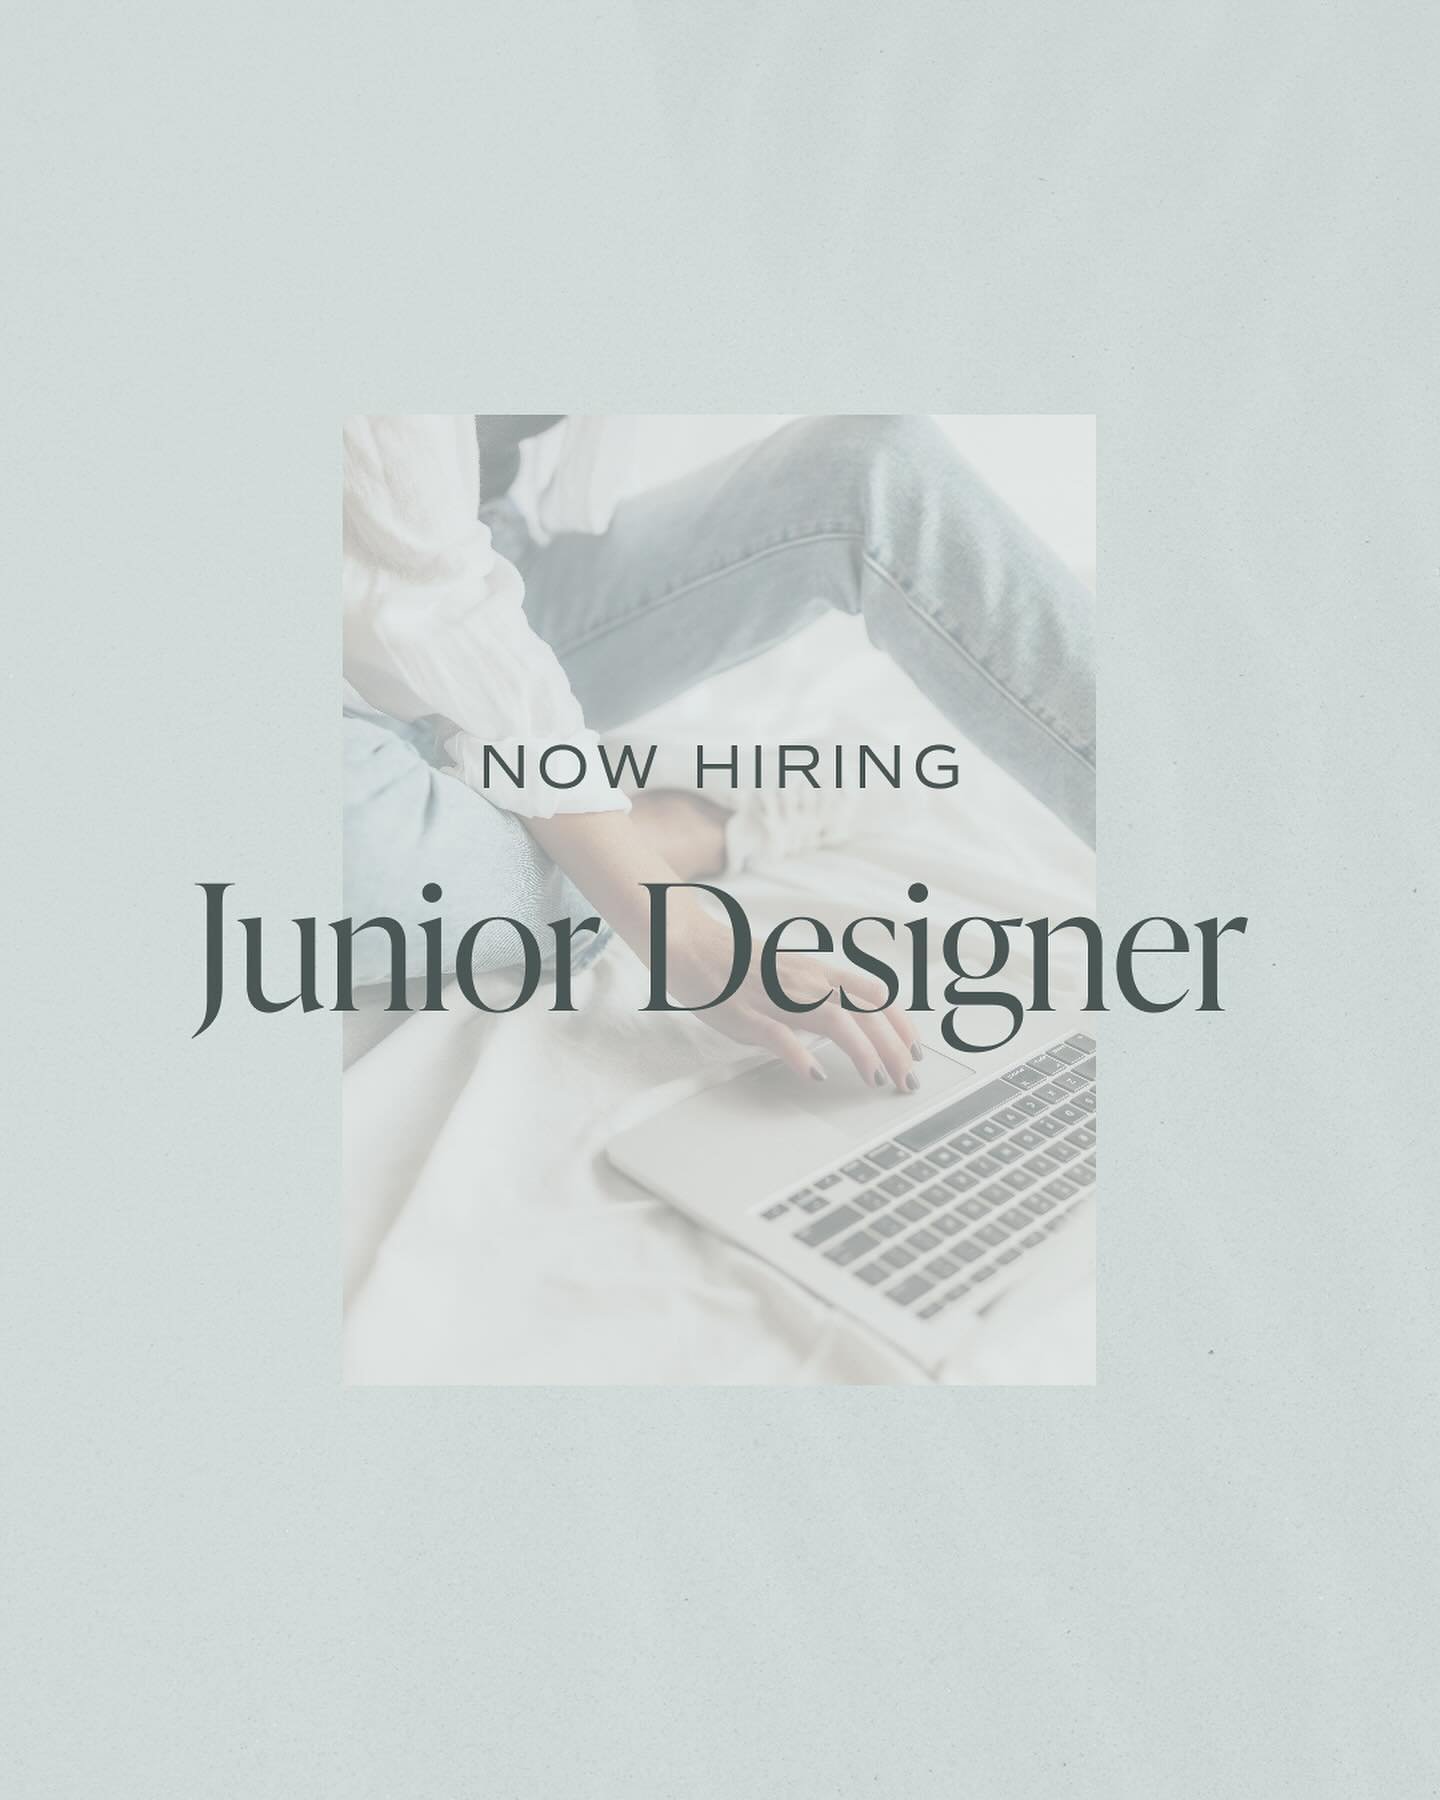 I&rsquo;m looking to hire a Junior Designer! 👩🏻&zwj;💻

This position would be great for a new grad or designer with a couple years under their belt who is looking to expand their design skills in a nurturing environment dedicated to personal and p